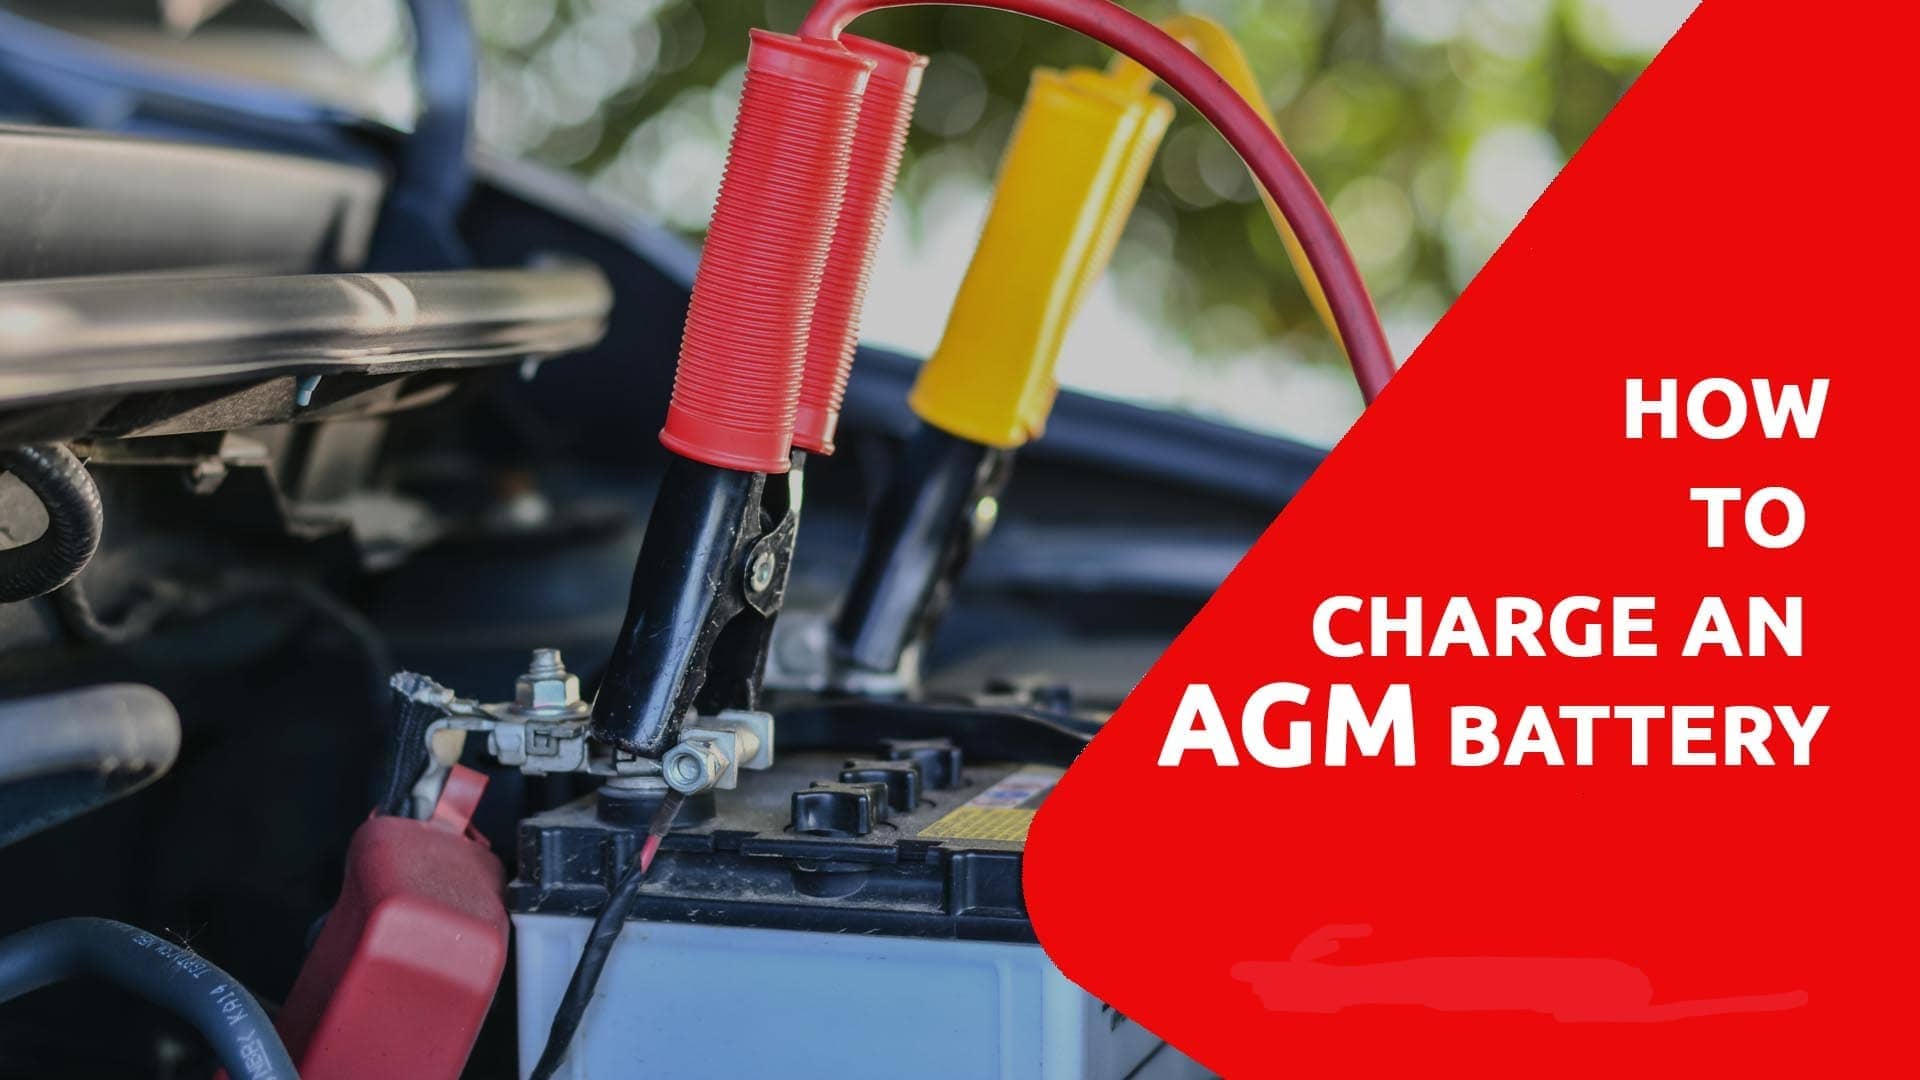 How to Charge An AGM Battery